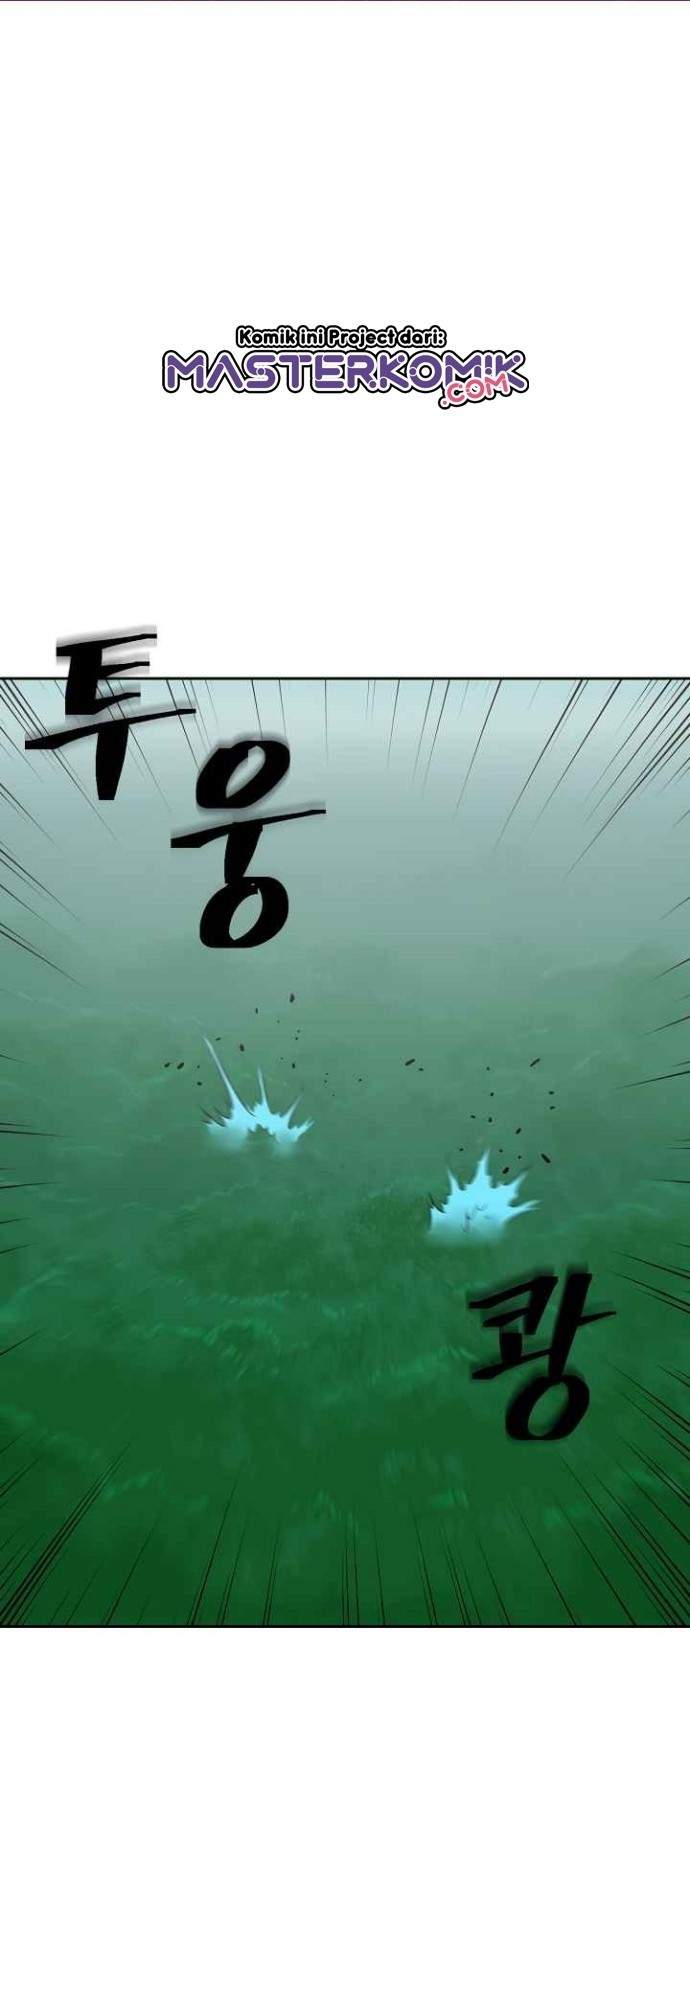 Record of the War God Chapter 108